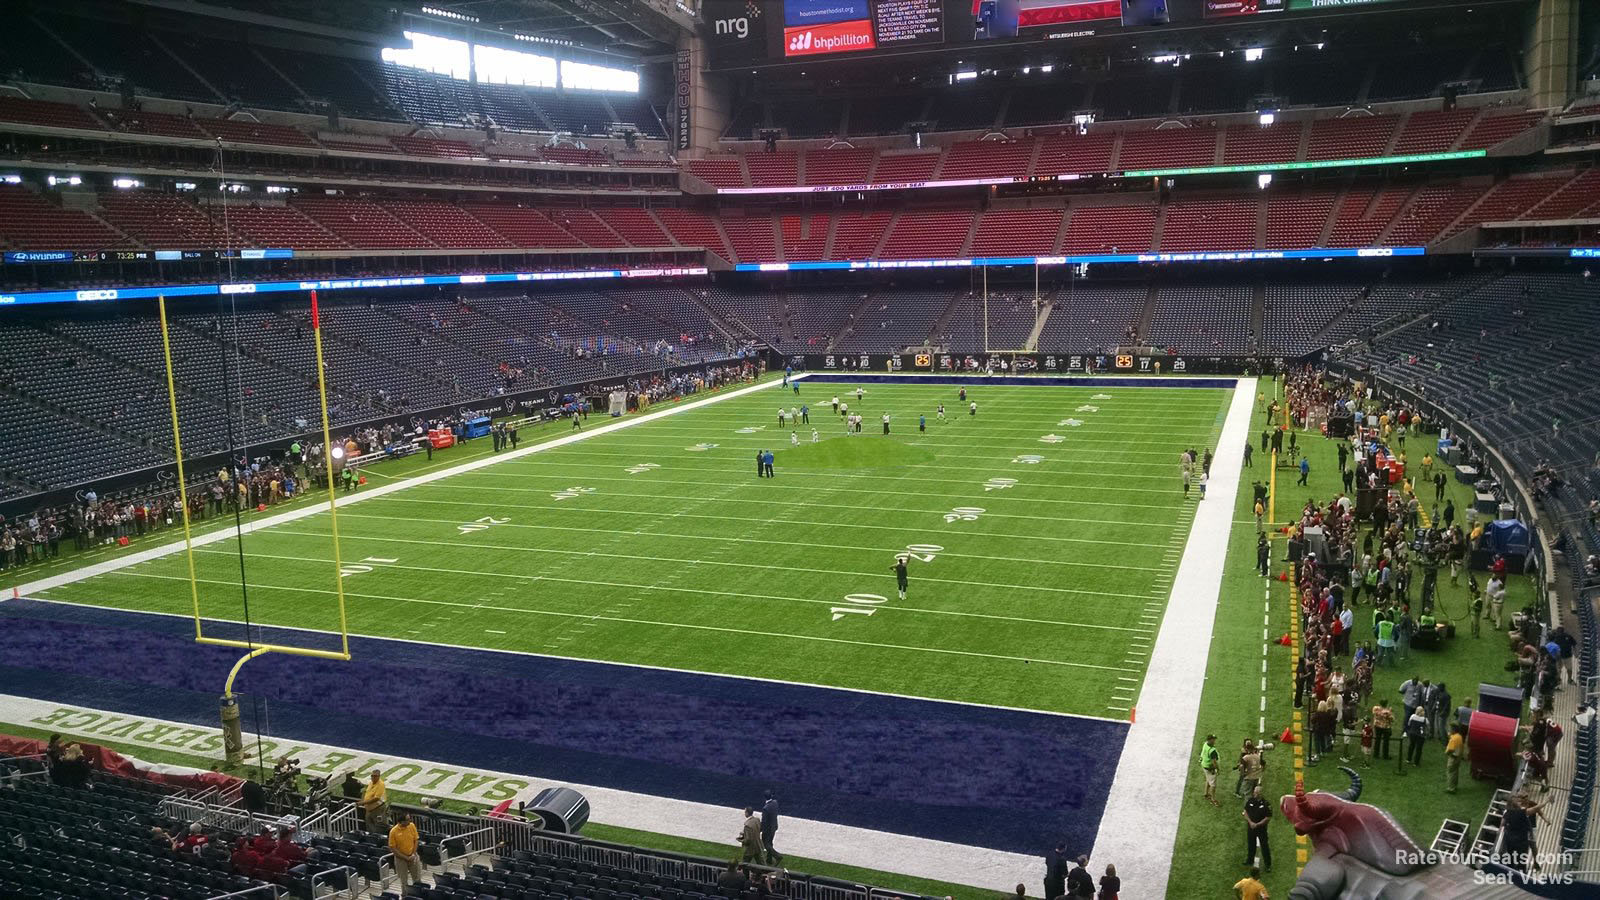 section 321, row a seat view  for football - nrg stadium